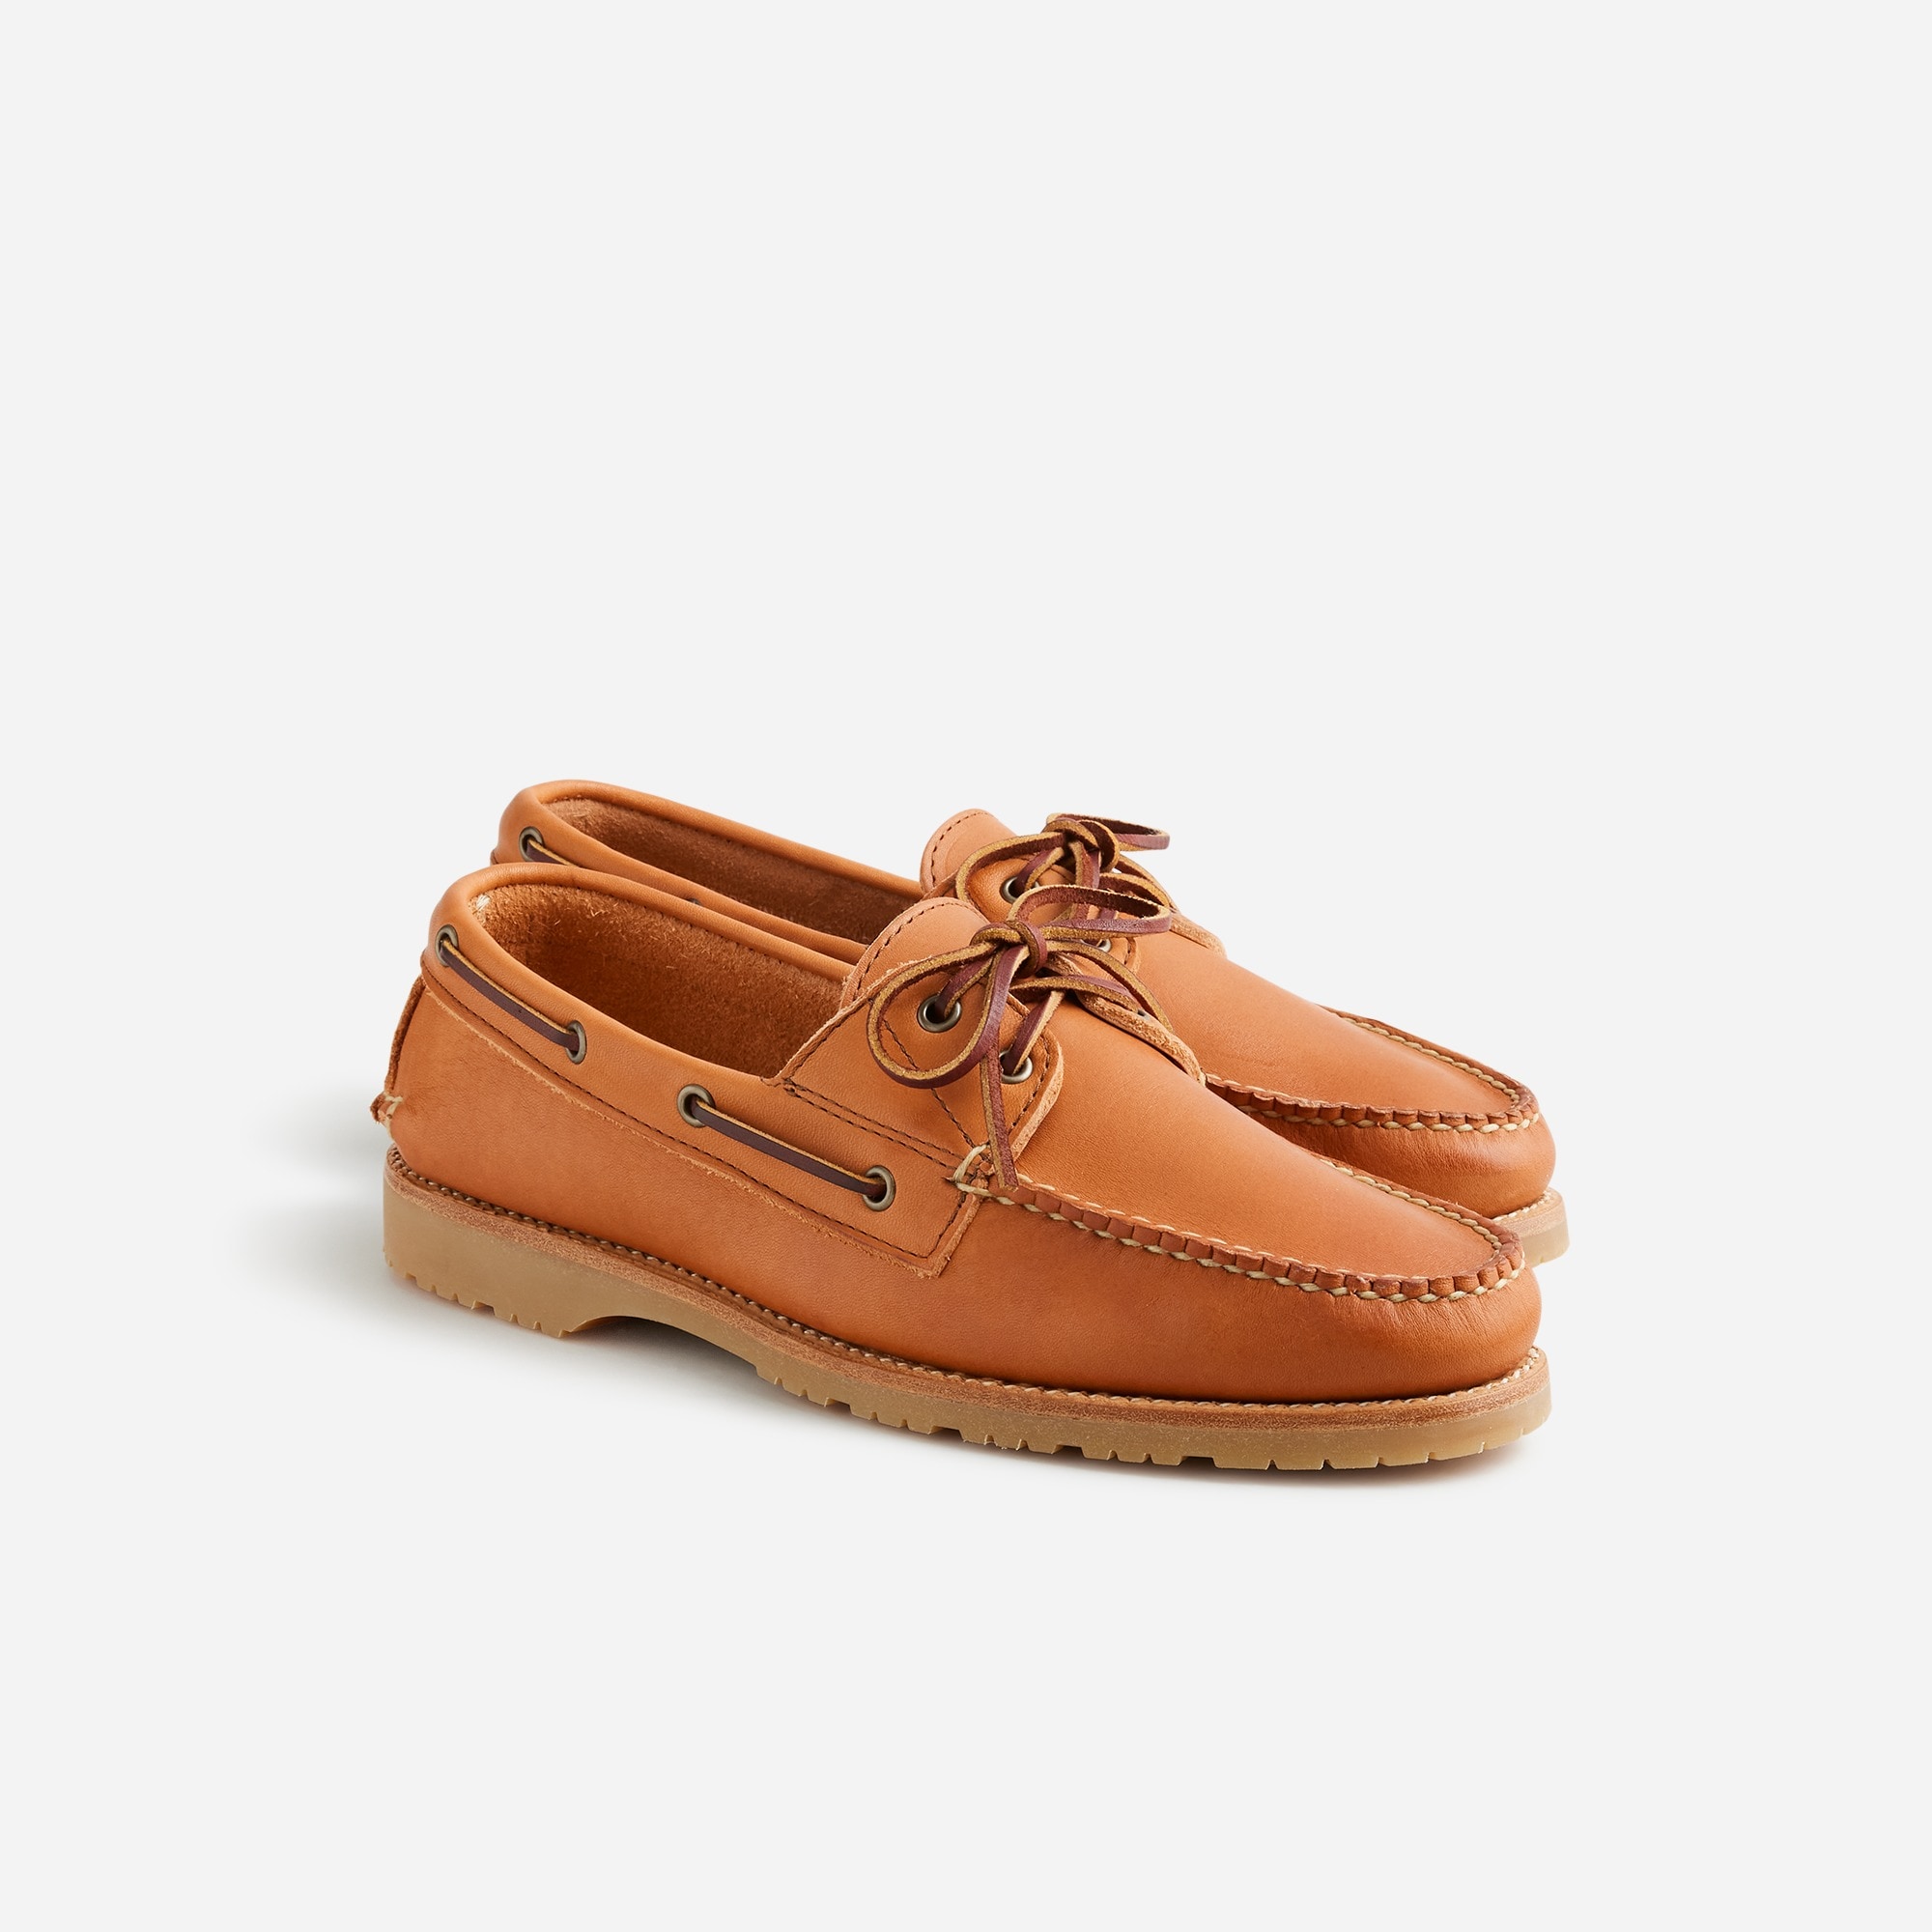 Rancourt & Co. X J.Crew Read boat shoes with lug sole